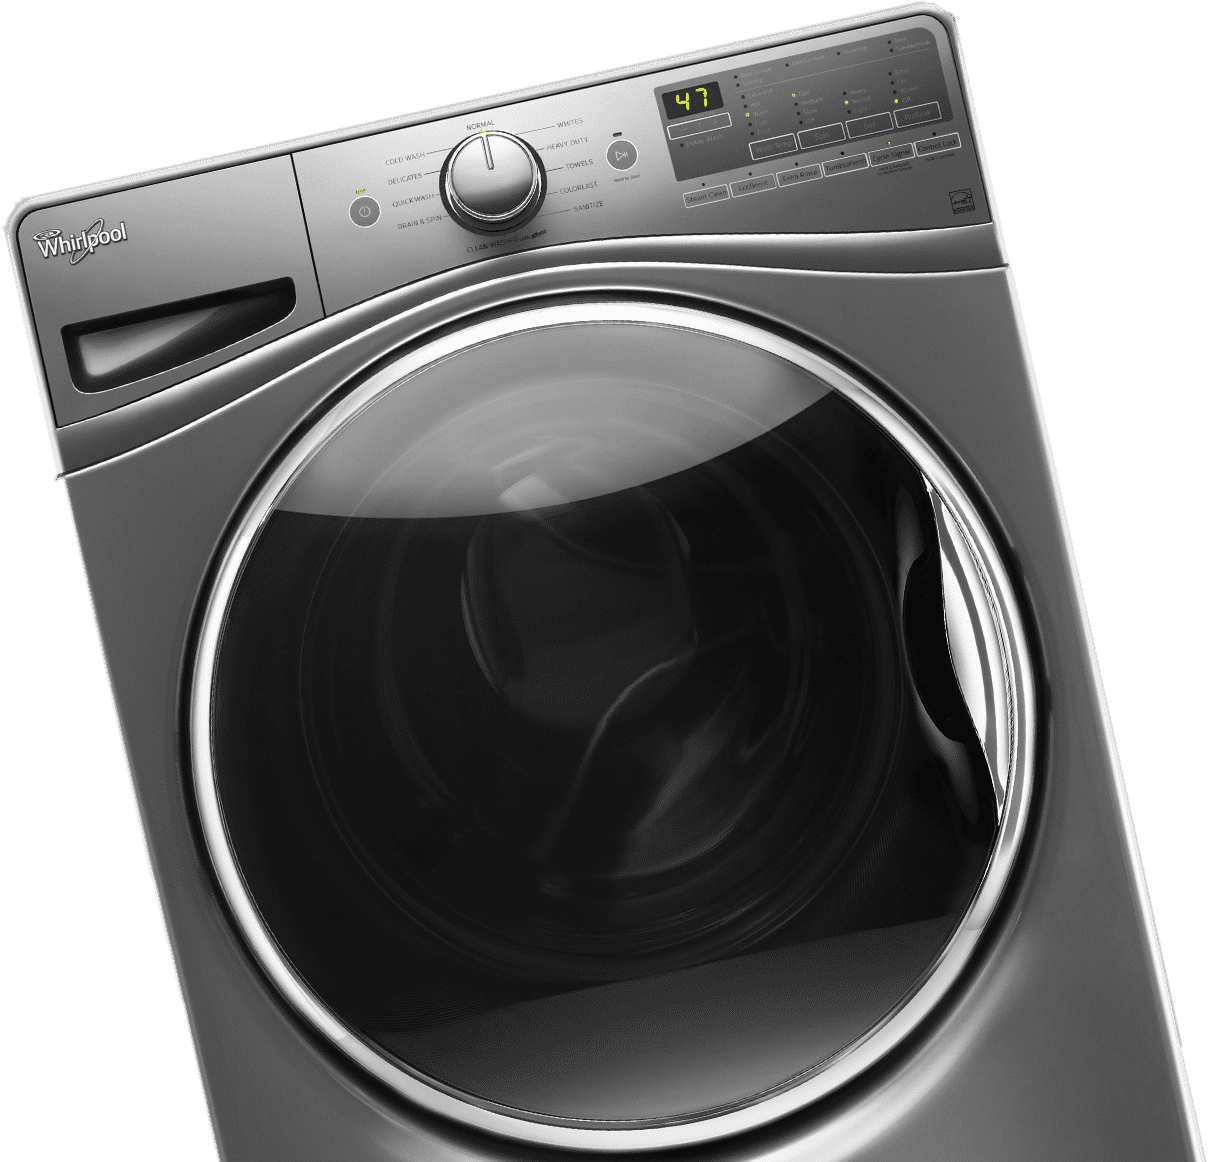 Whirlpool Wahing Machine Clearance on Appliances at Grand